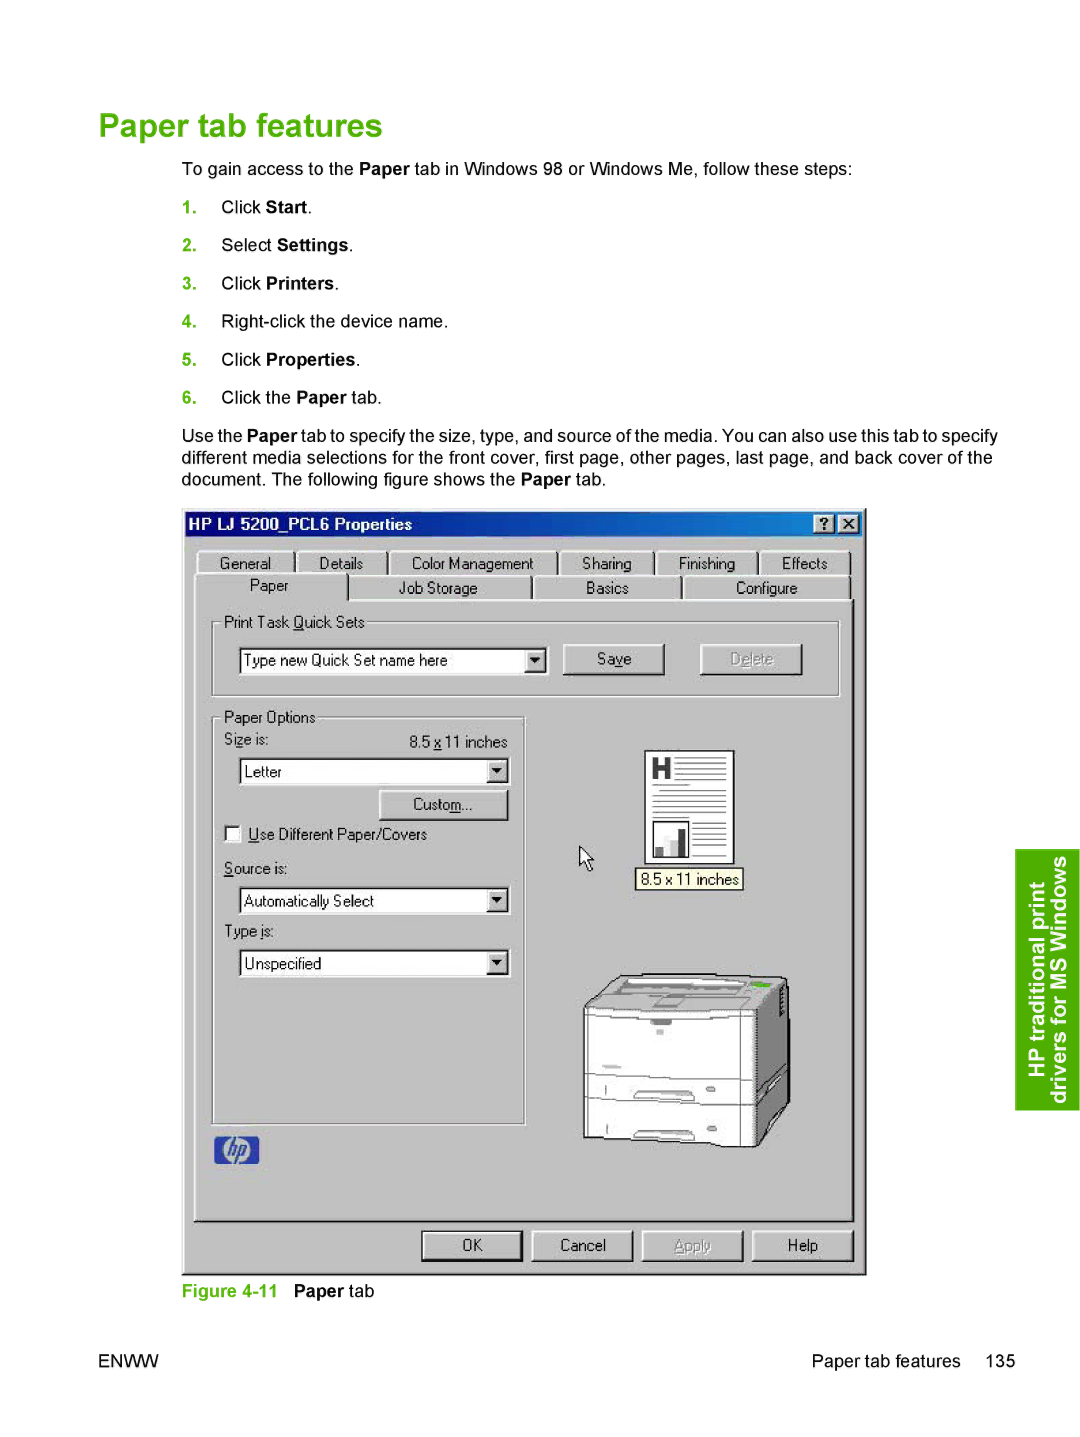 HP 5200L manual Paper tab features 